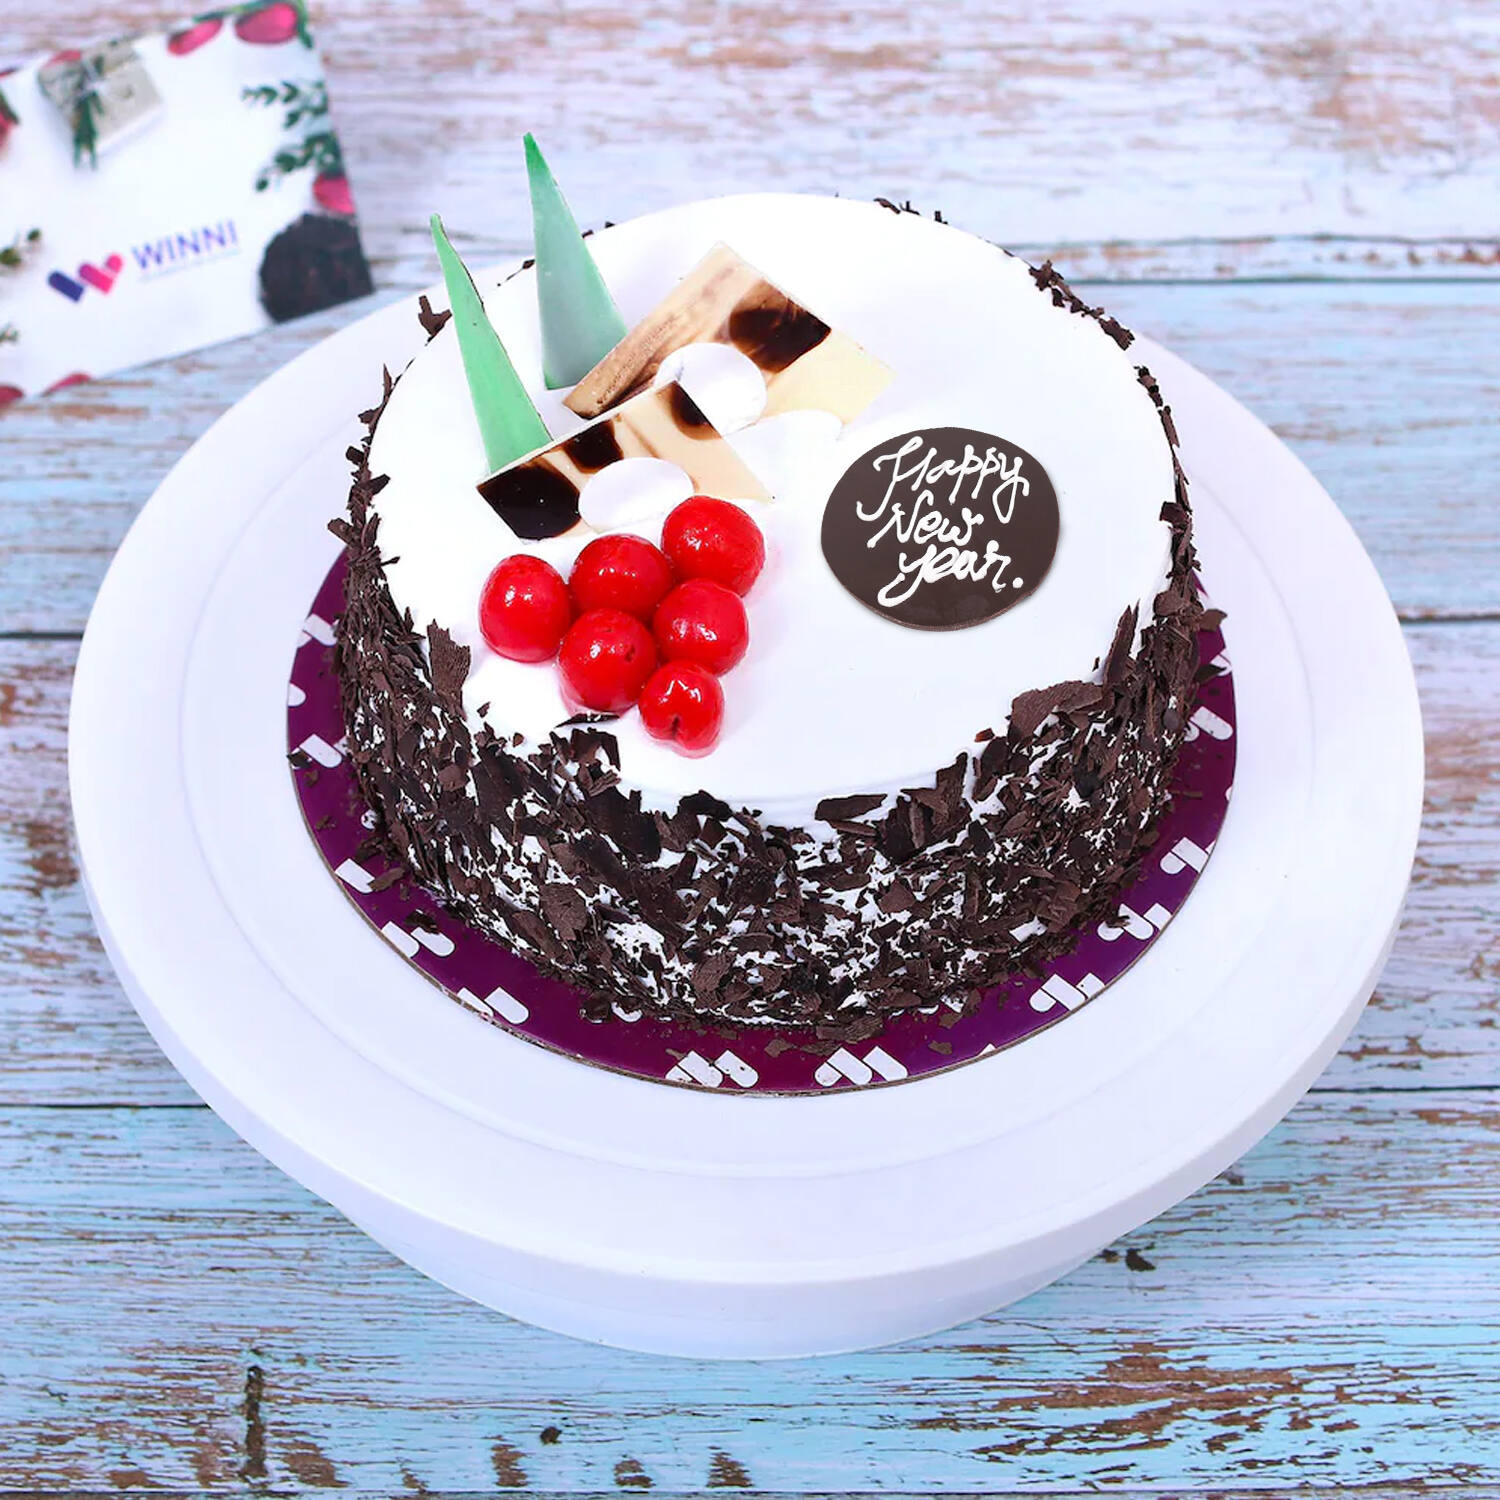 Double Chocolate Black Forest Cake - I Scream for Buttercream